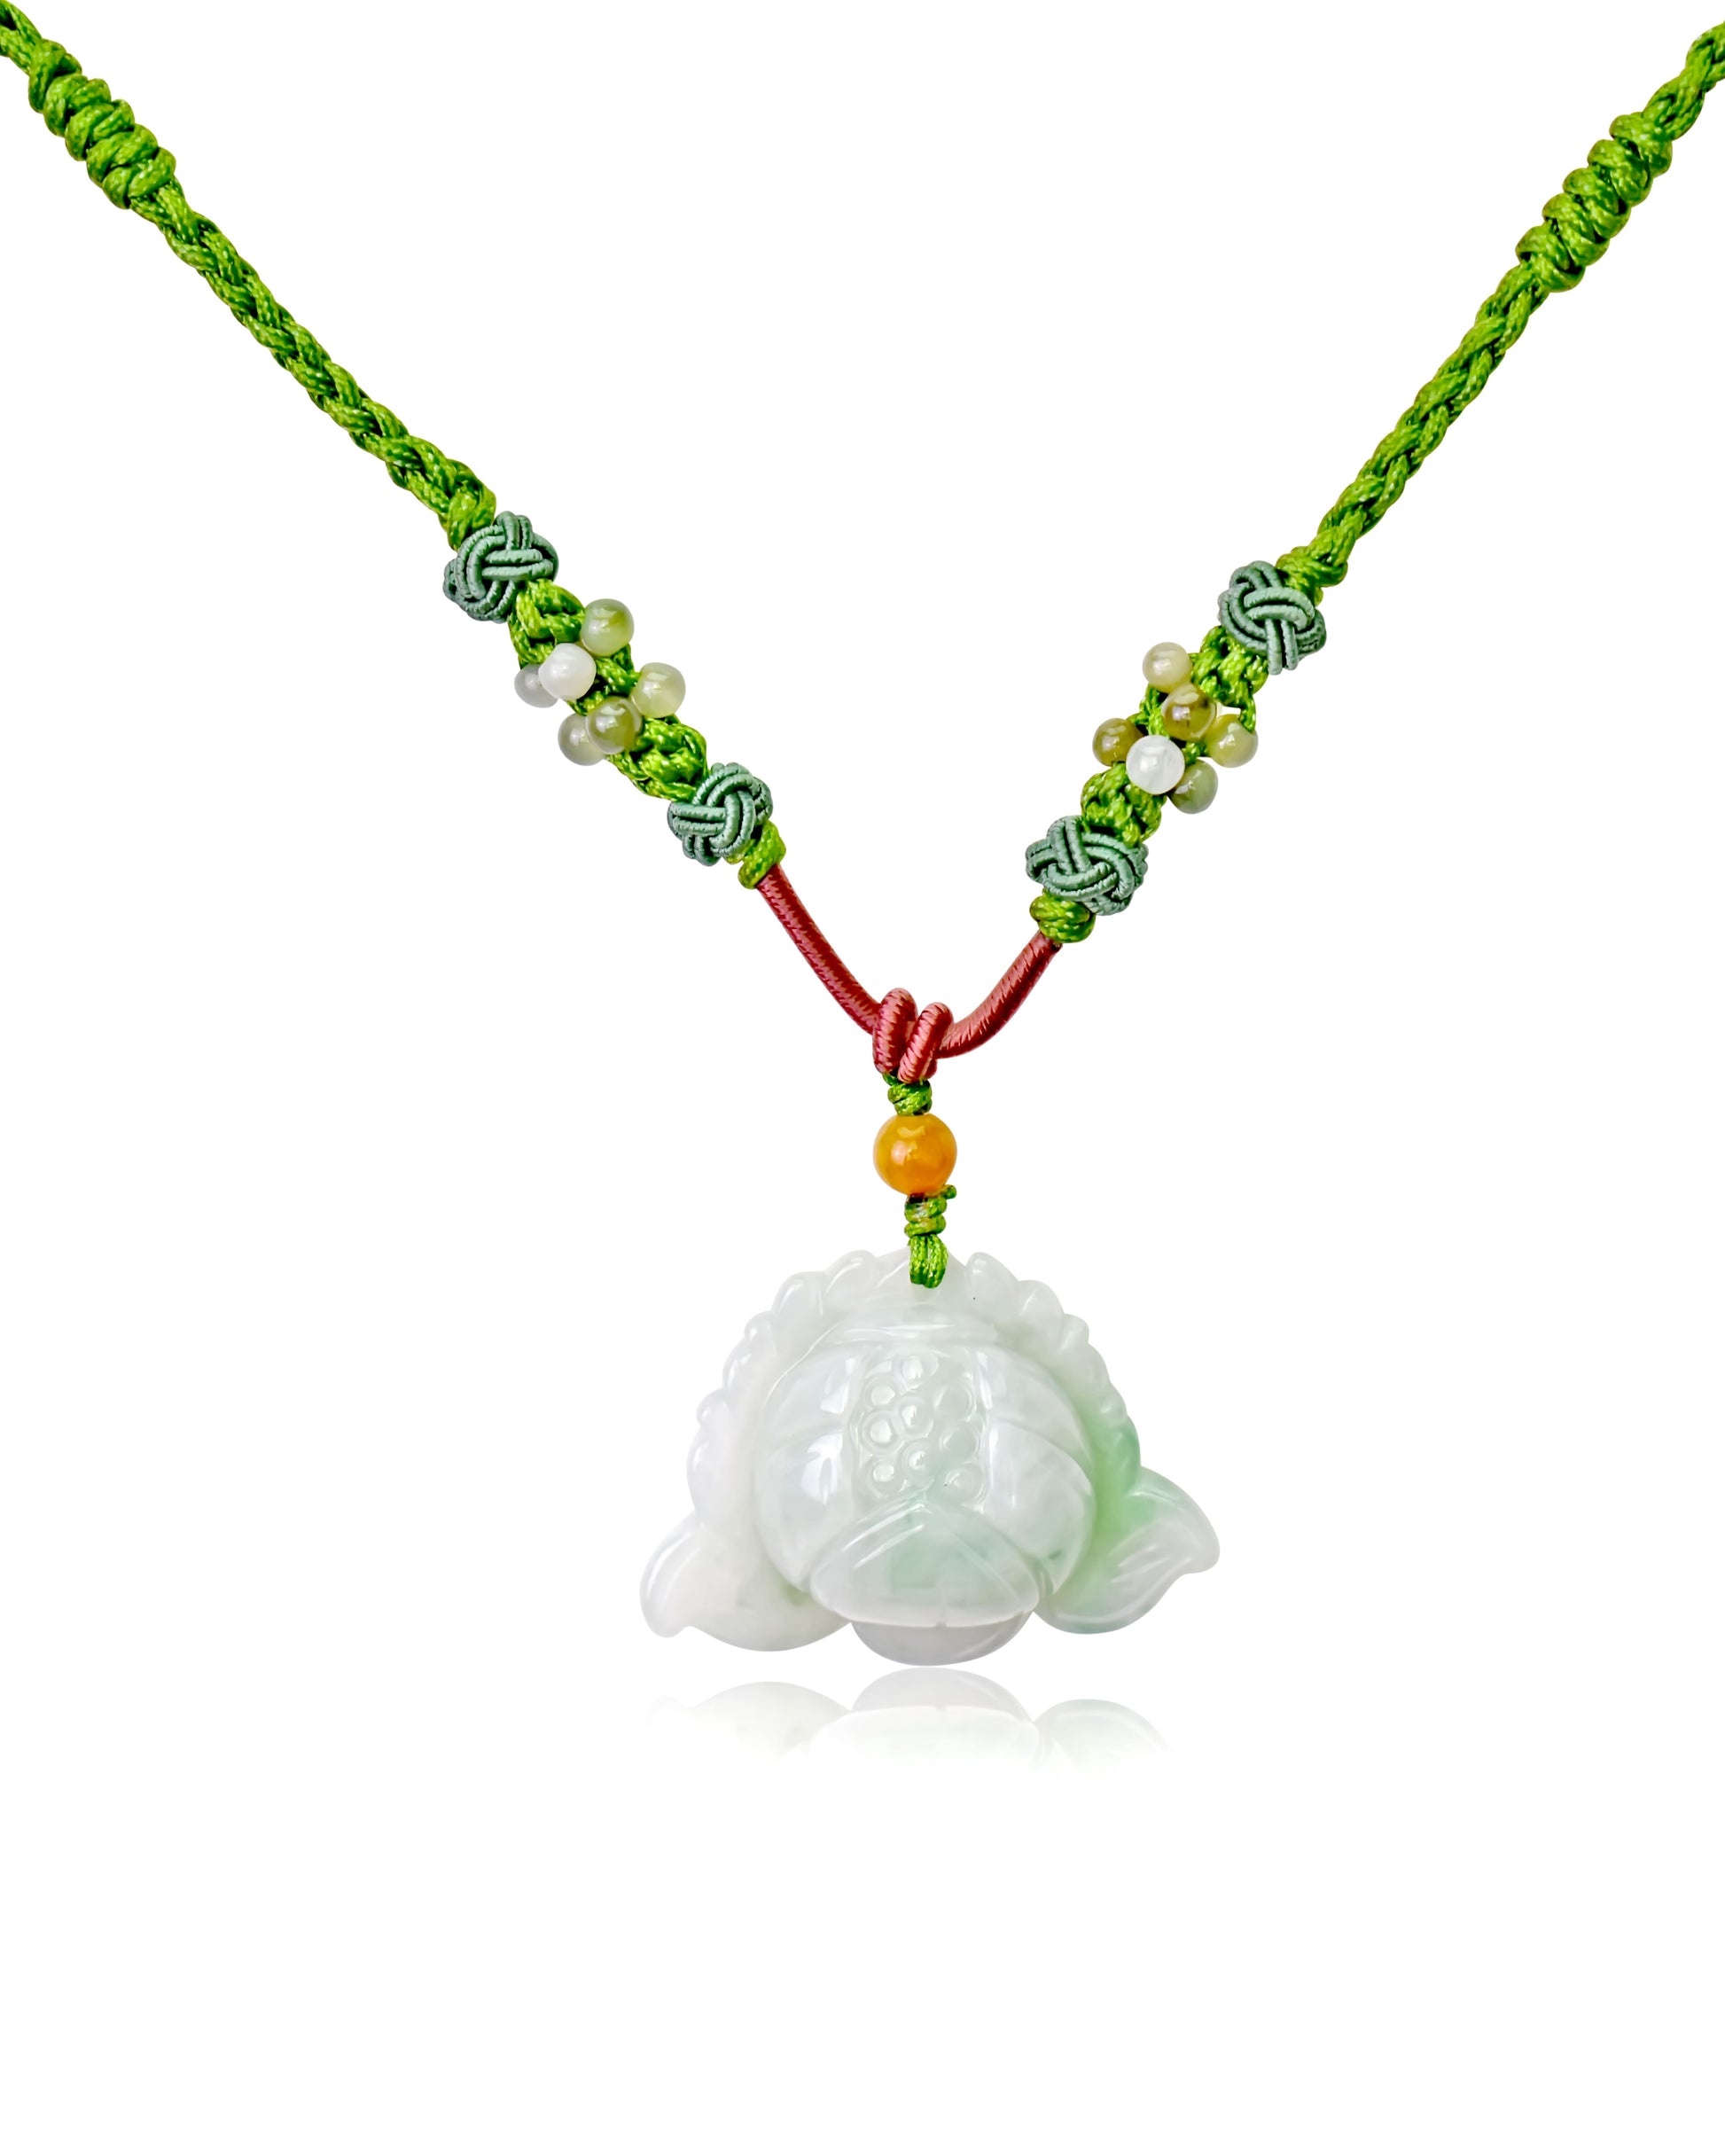 Purity in Your Life with Lotus Flower Jade Necklace made with Lime Cord